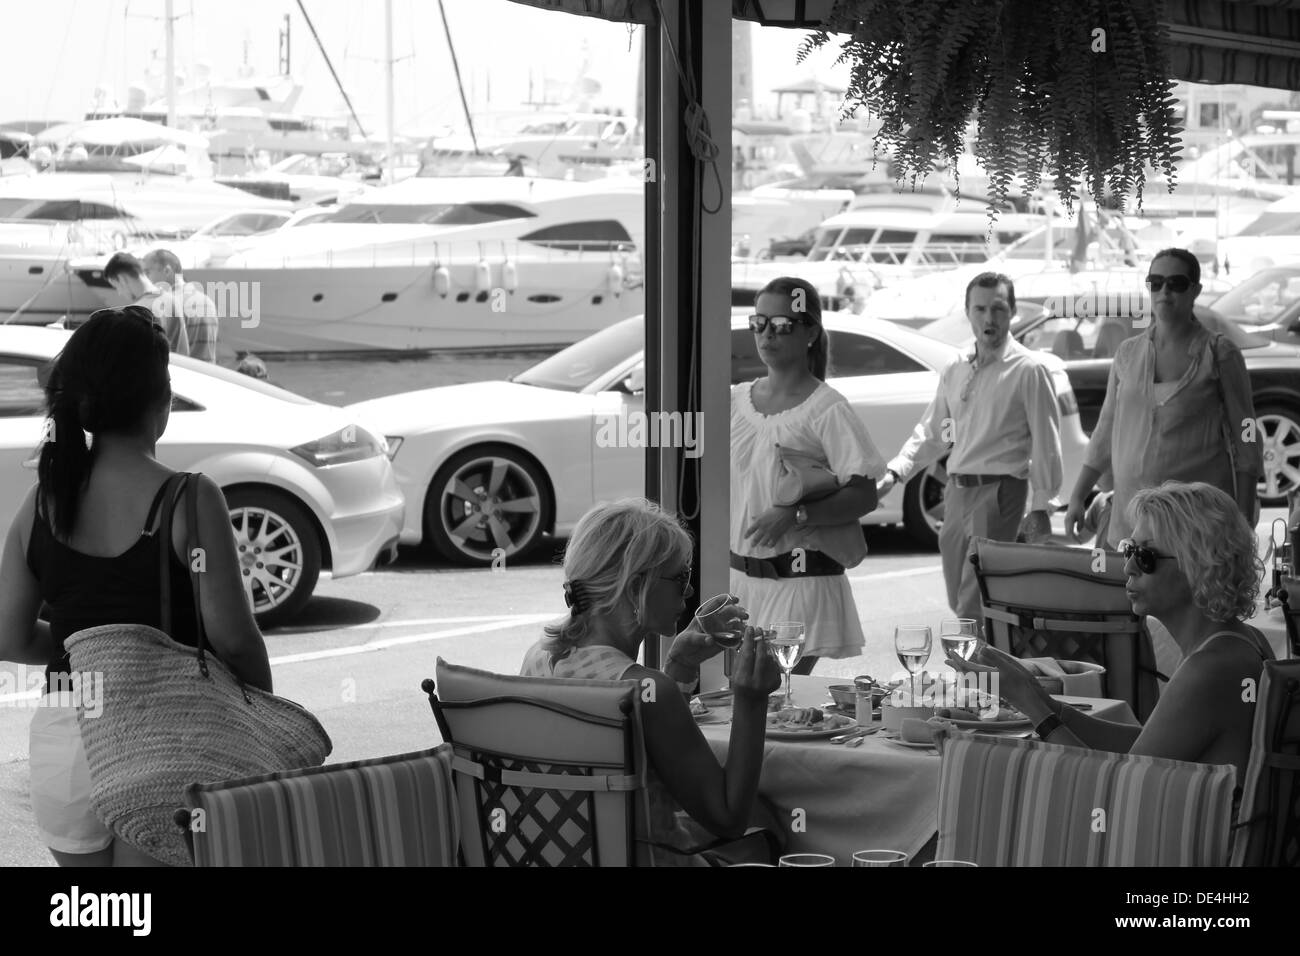 View across cafe restaurant towards harbour in sunny Mediterranean town Stock Photo